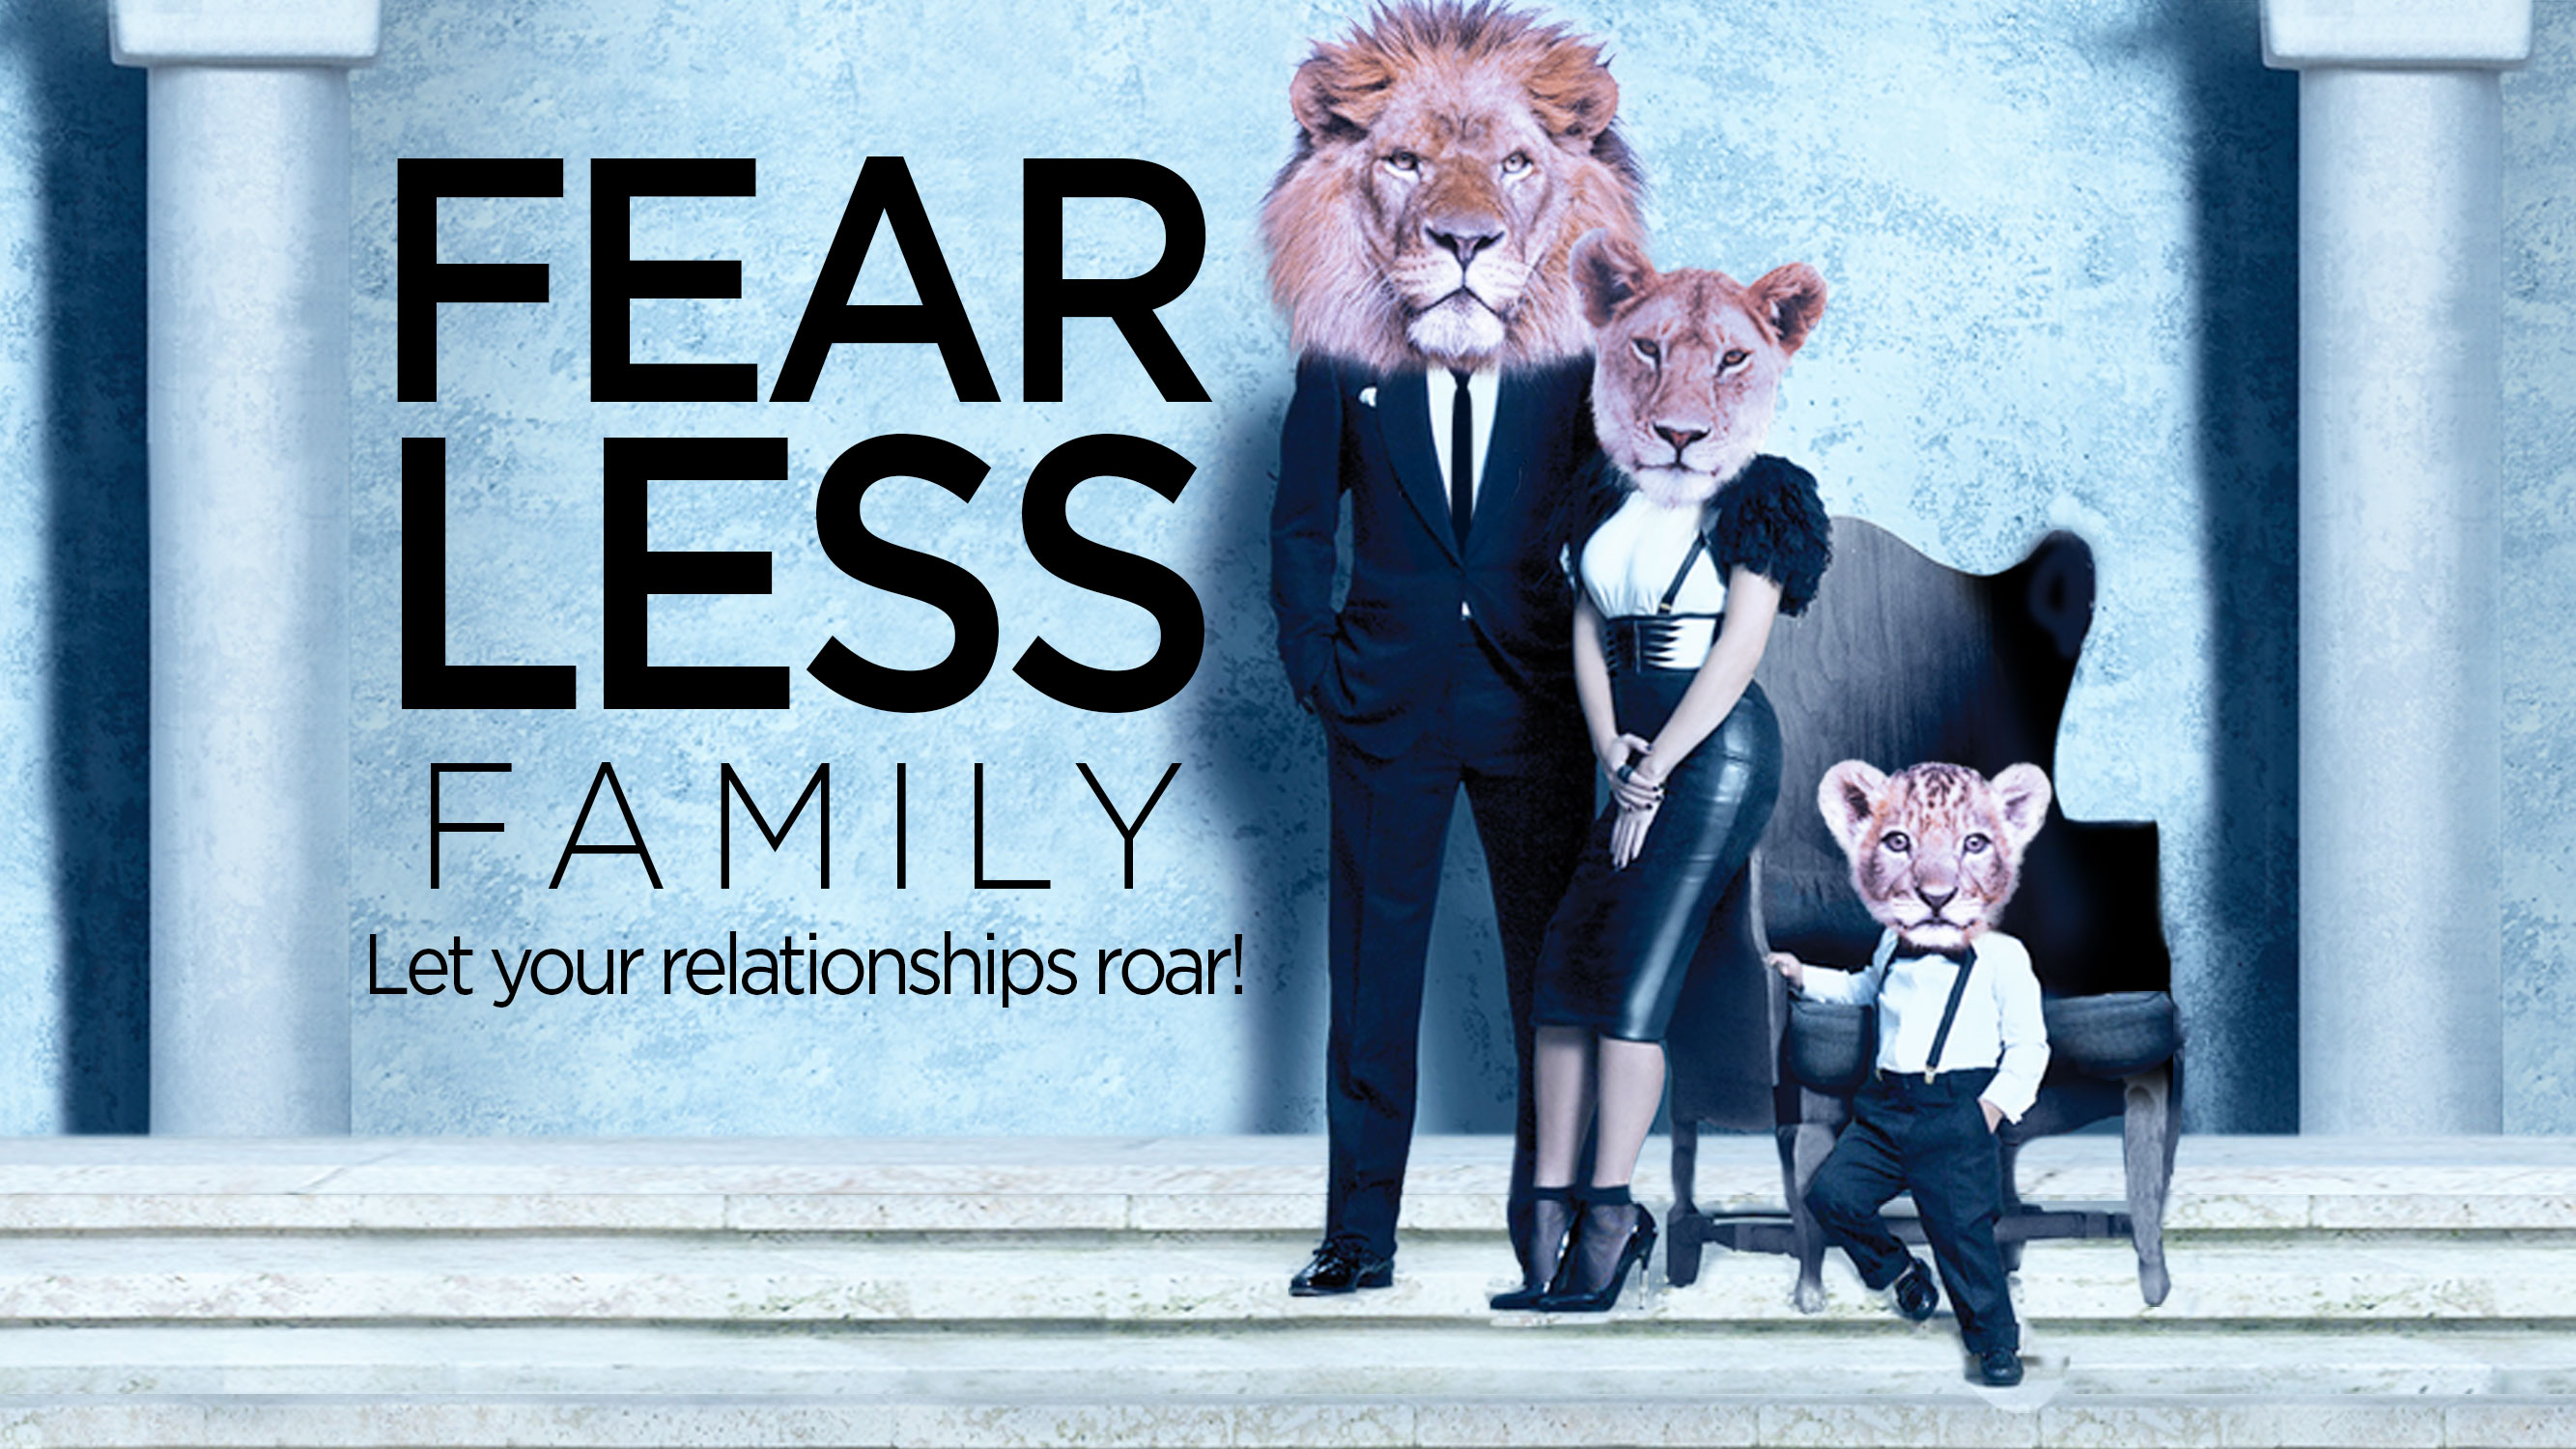  Fearless Family